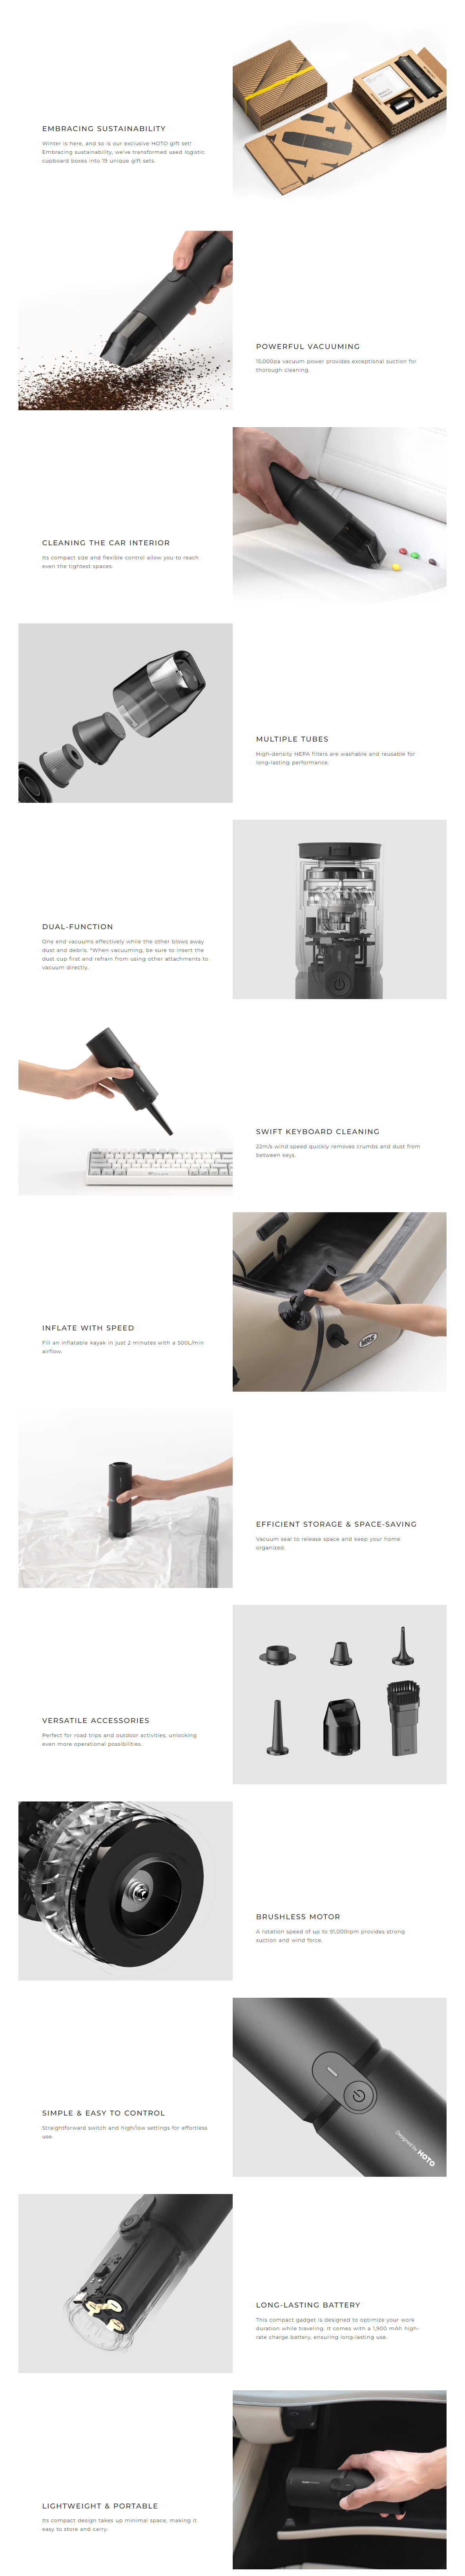 A large marketing image providing additional information about the product HOTO Compressed Air Capsule 4-in-1 Work Station Air Duster & Handheld Vacuum - Additional alt info not provided